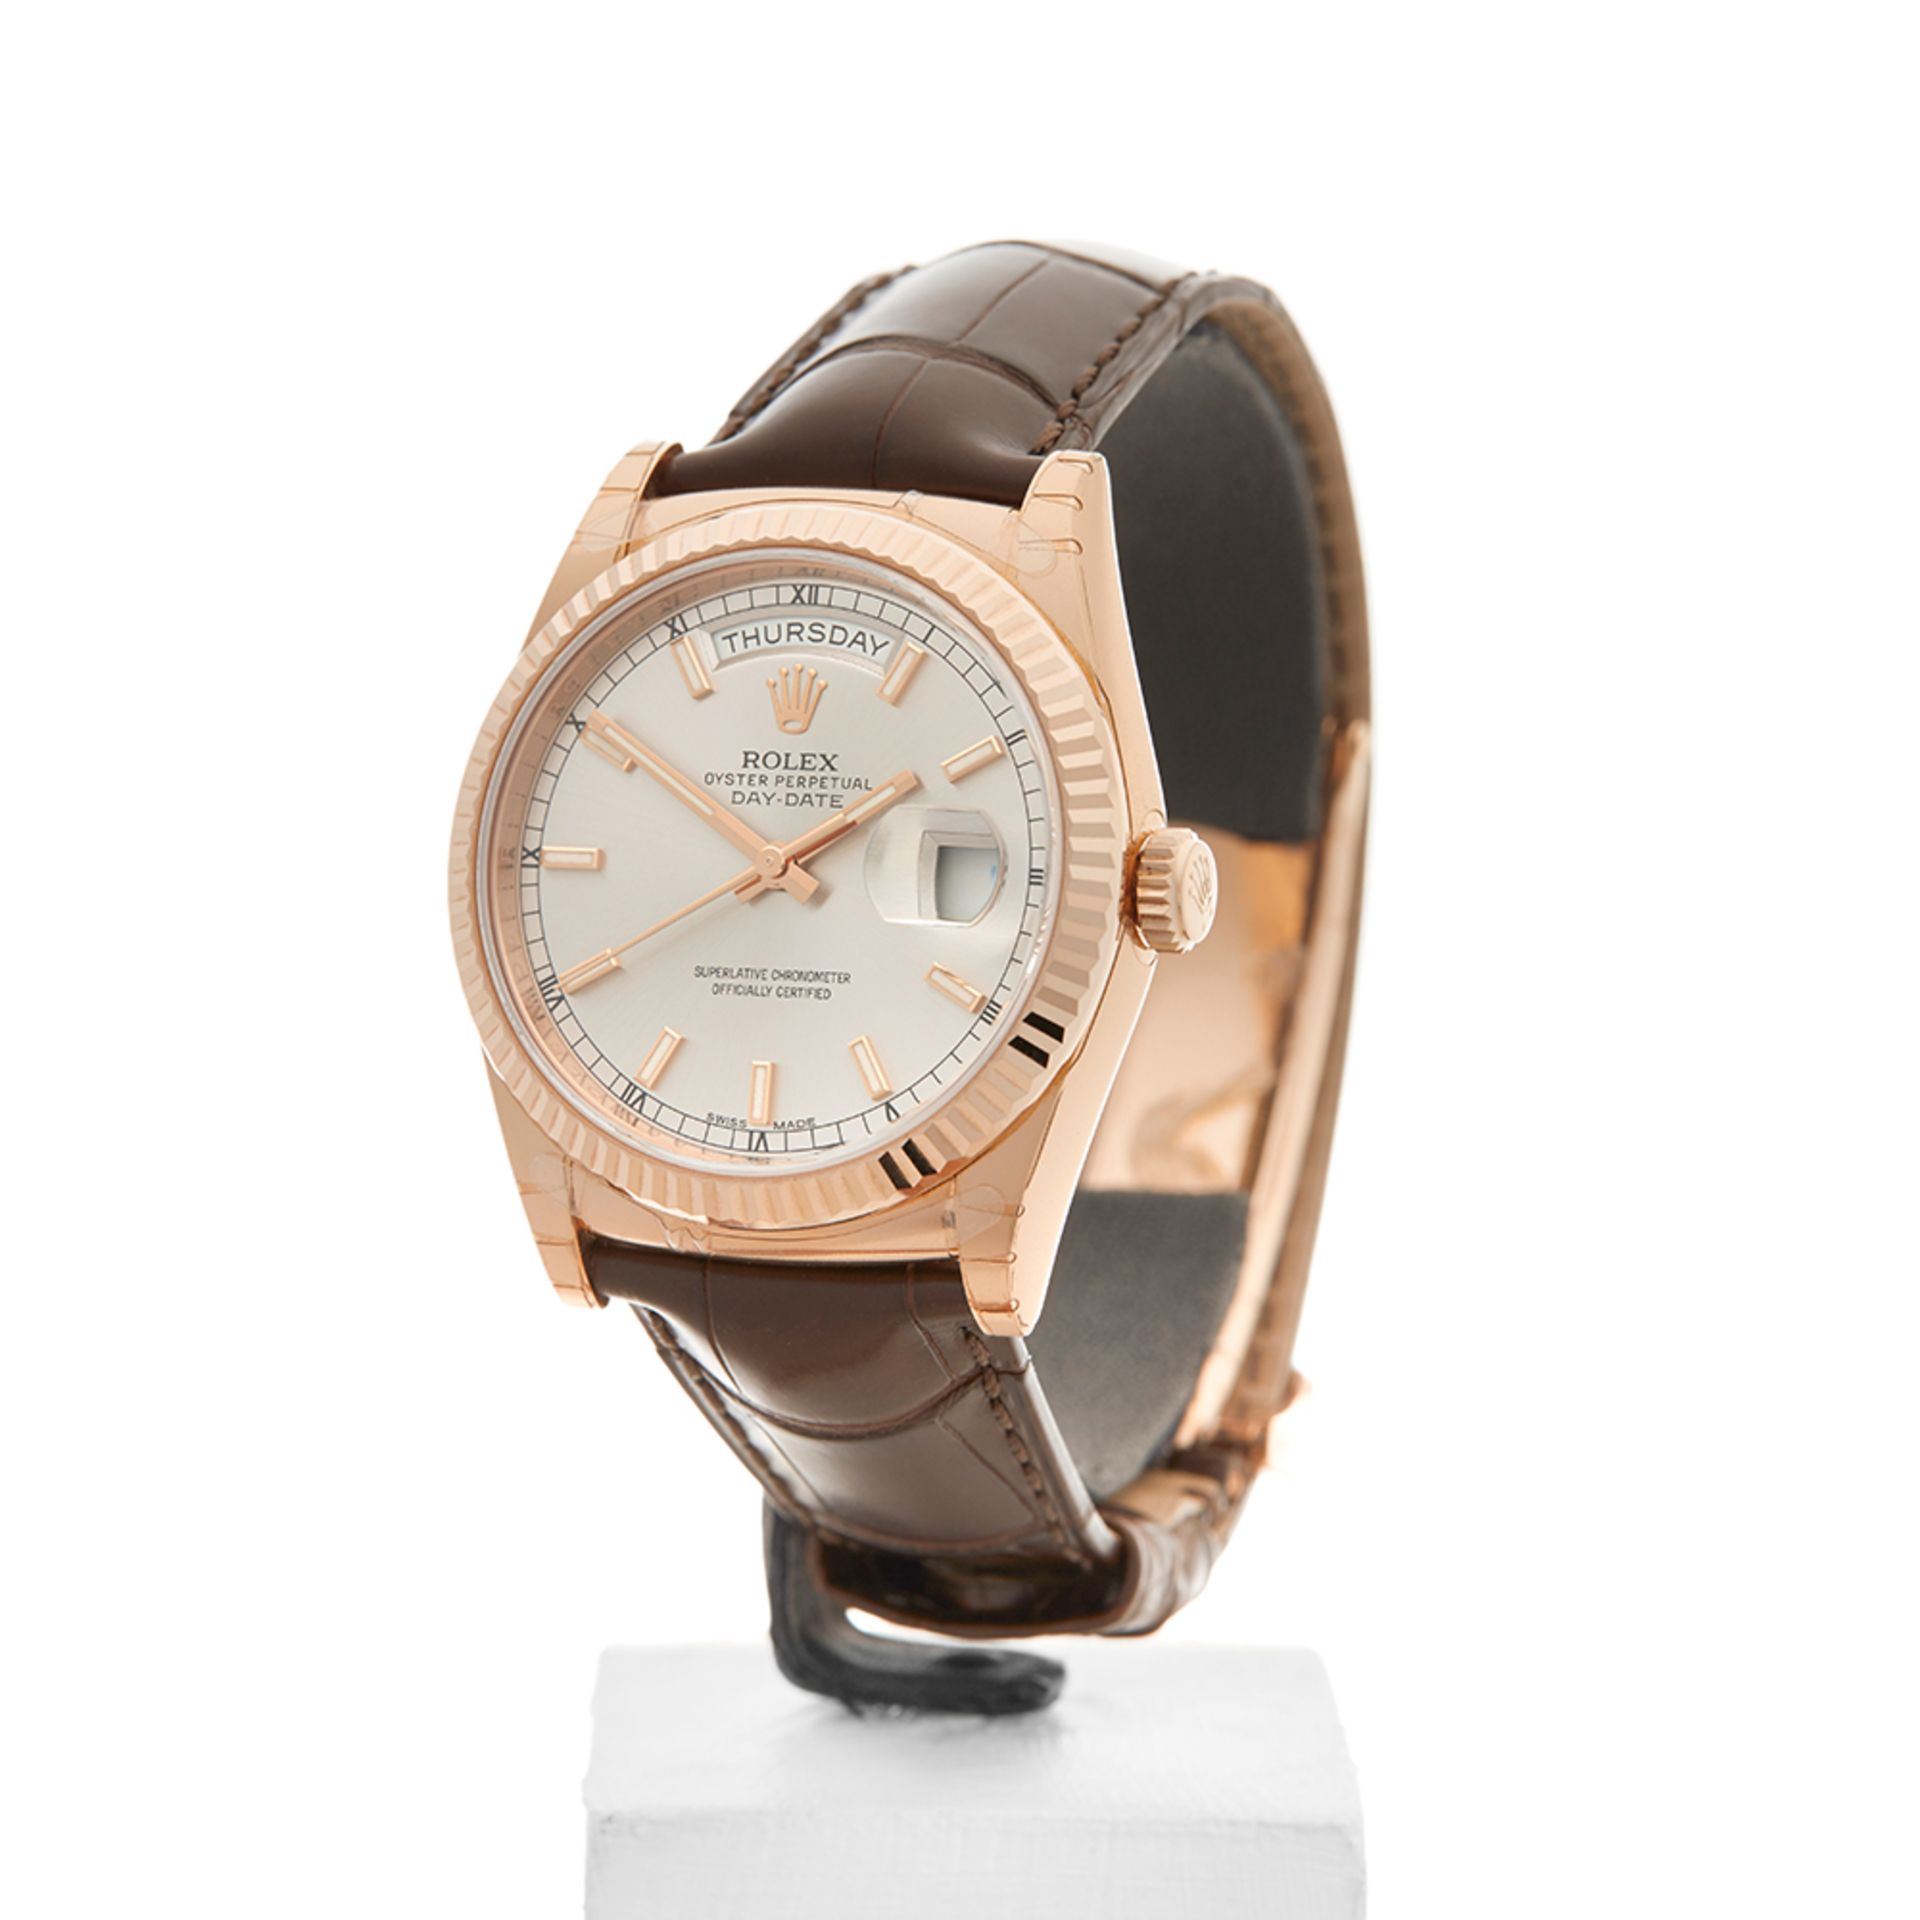 Day-Date 36mm 18K Rose Gold - 118135 - Image 3 of 9